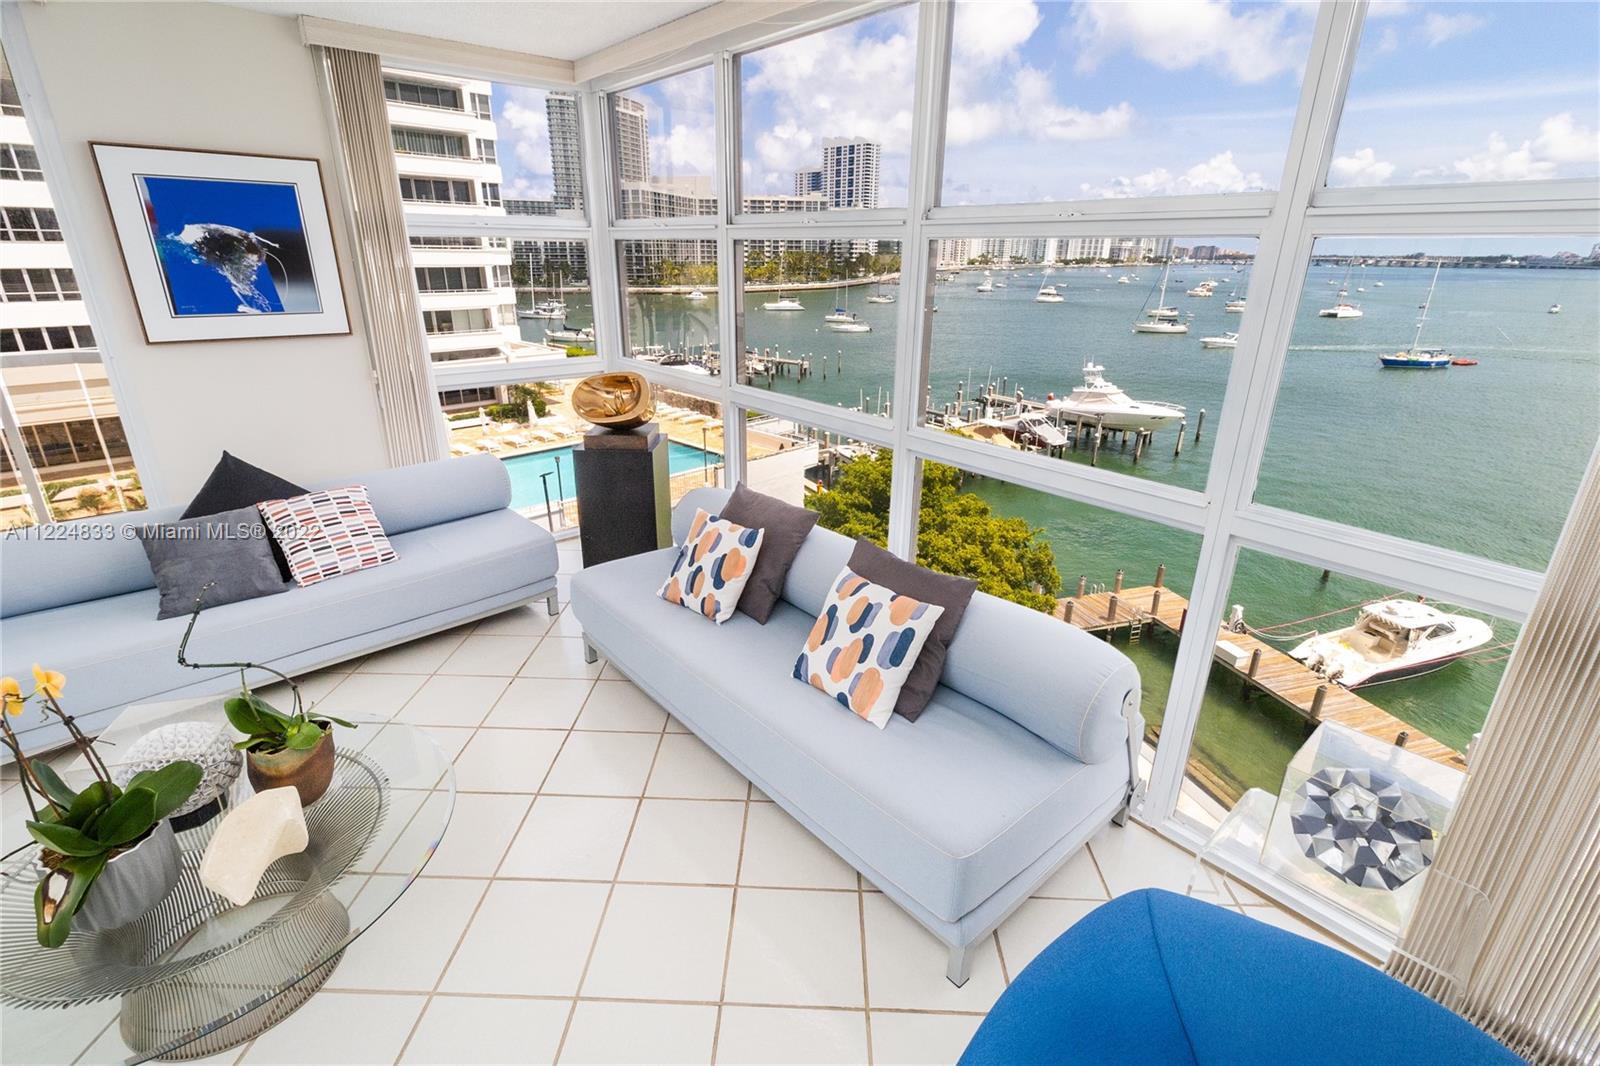 Bright and spacious corner unit with breathtaking unobstructed water views of Biscayne Bay! This apa